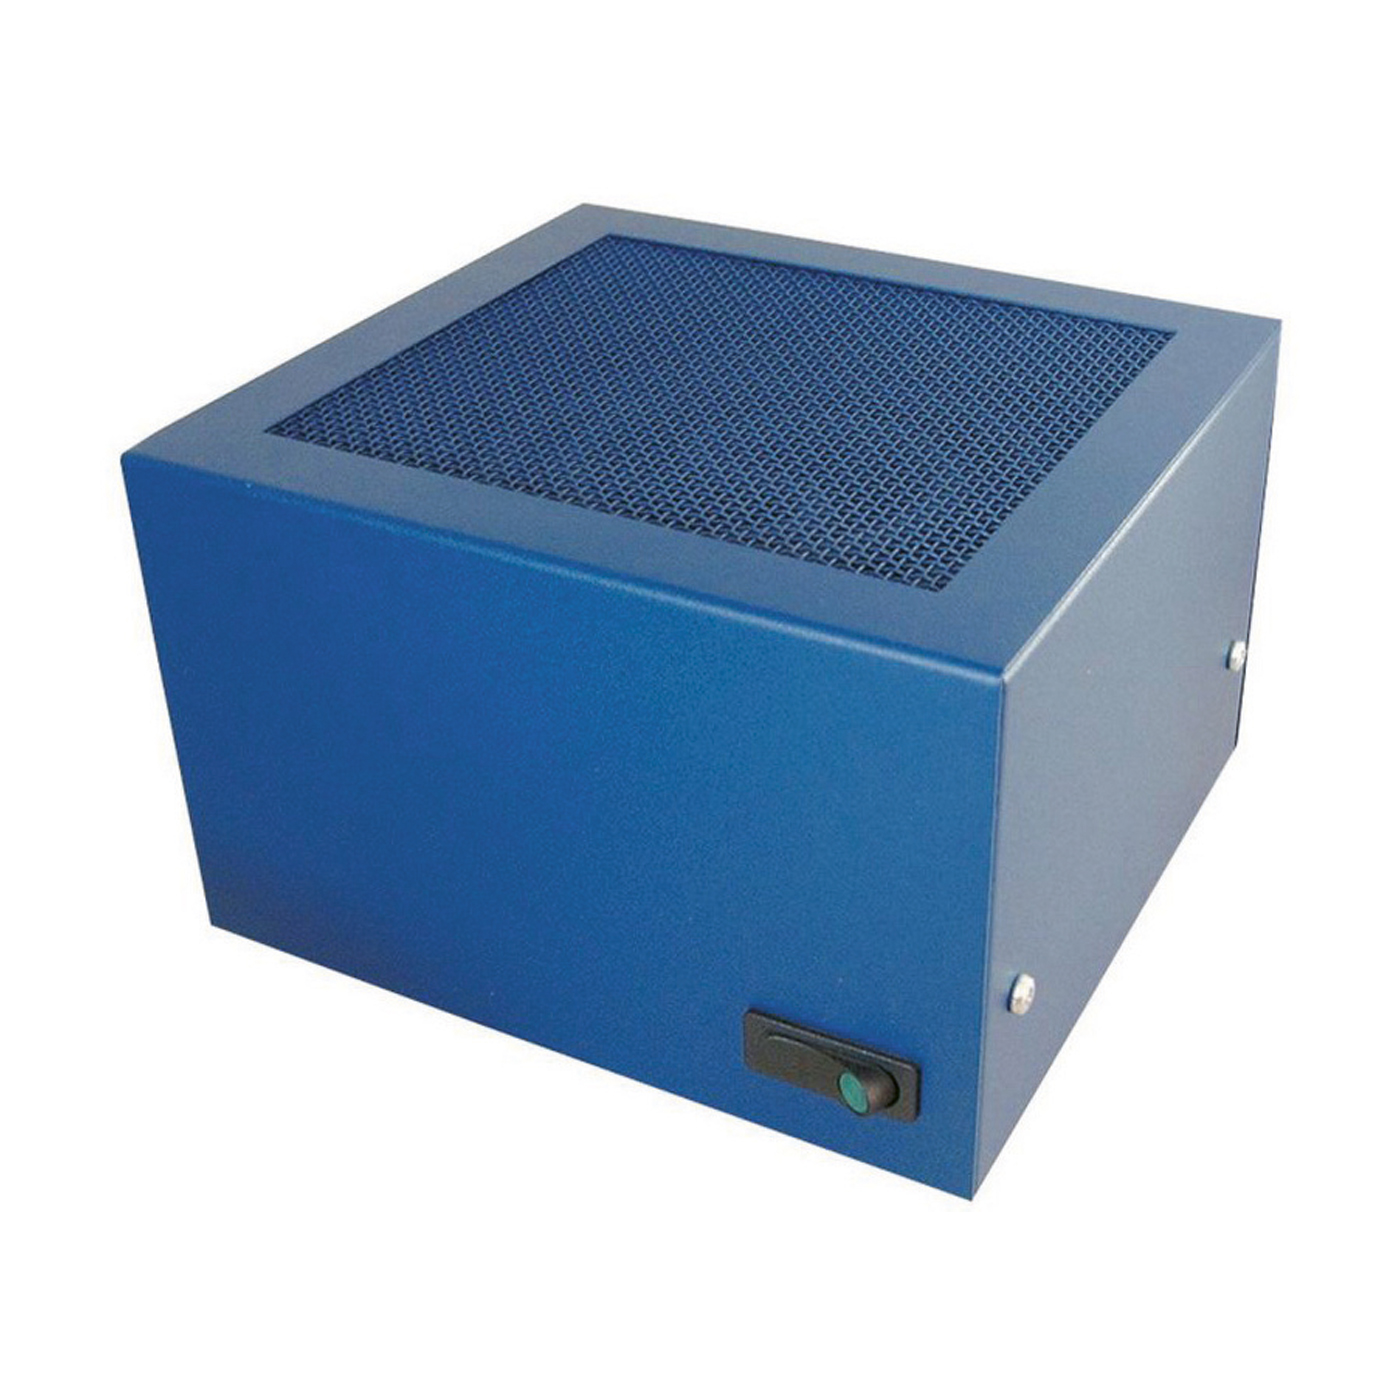 T8 Warm Air Drying Unit - 1 piece